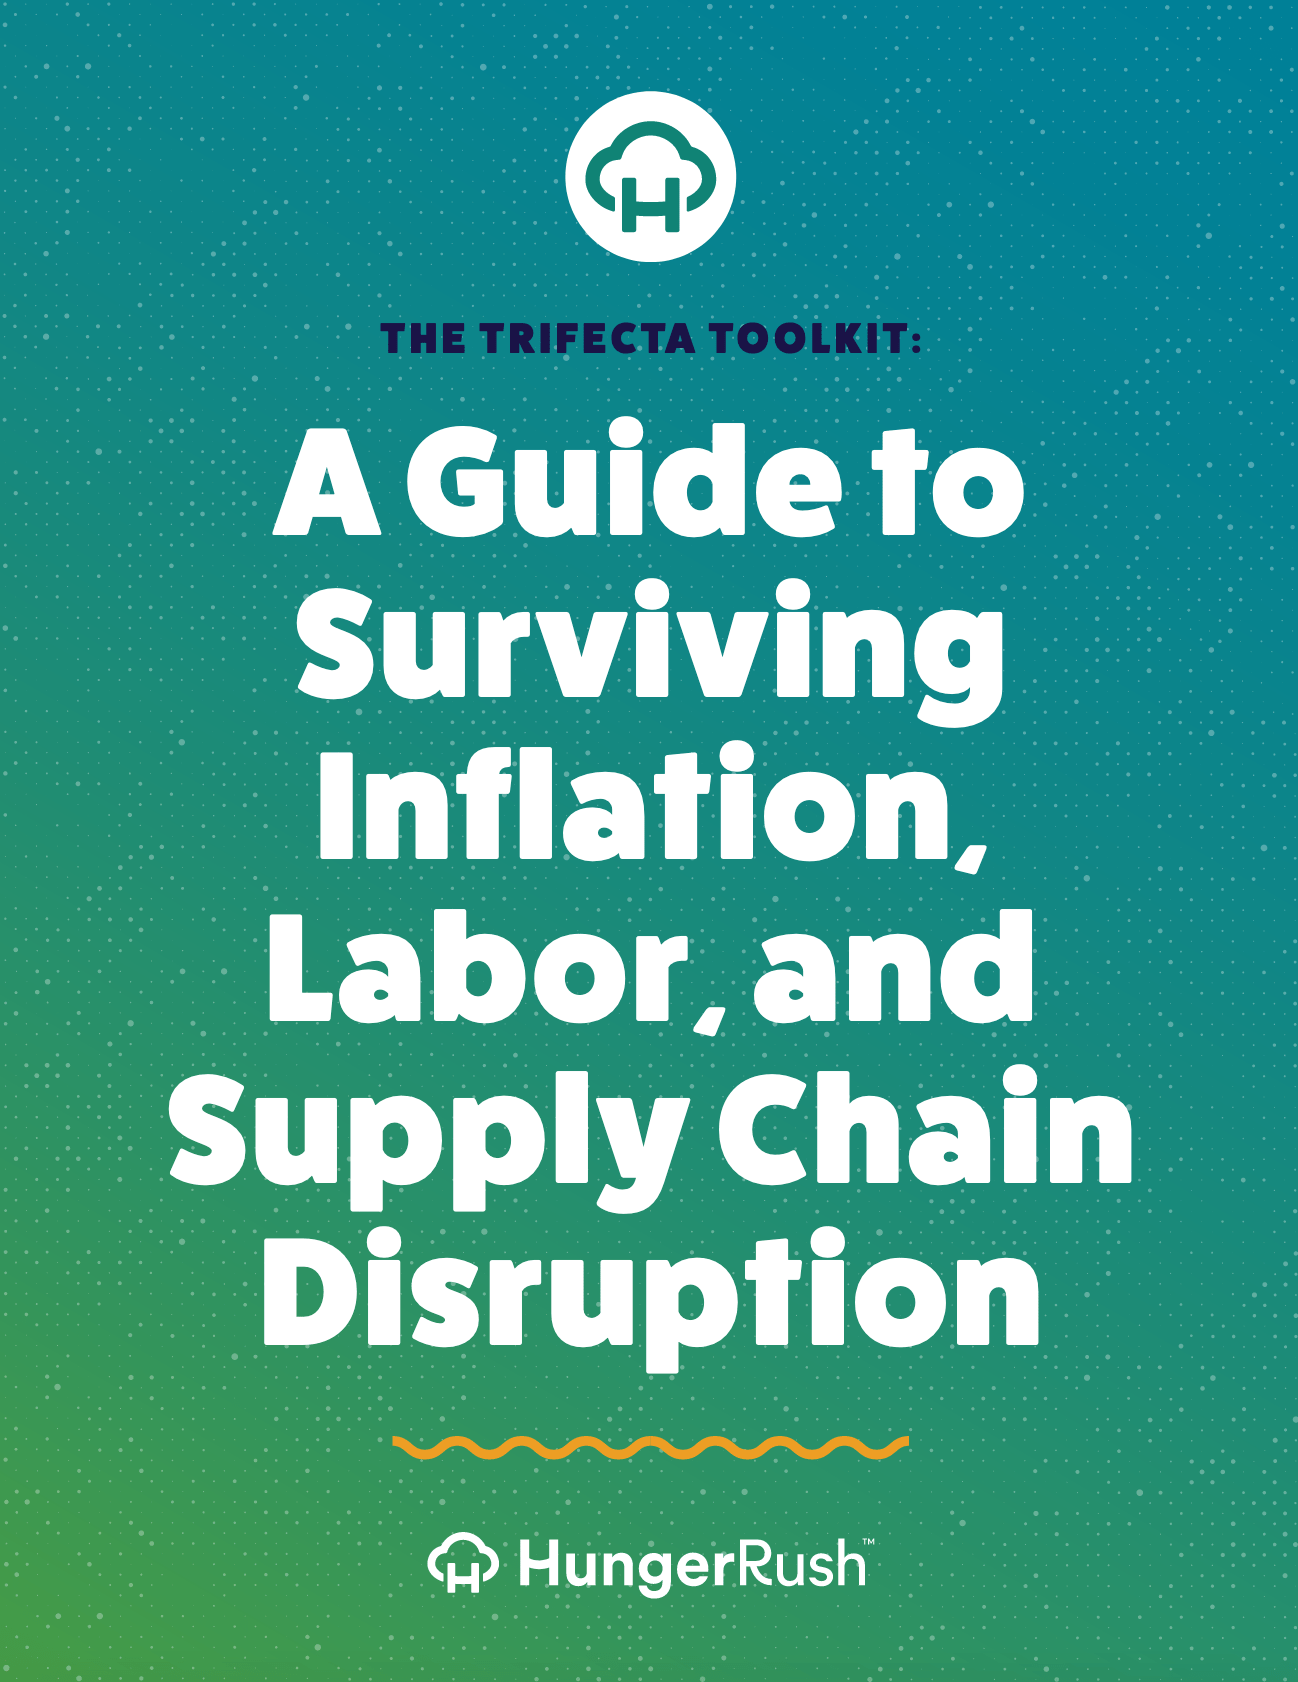 trifecta toolkit ebook - A Guide to Surviving Inflation, Labor, and Supply Chain Disruption